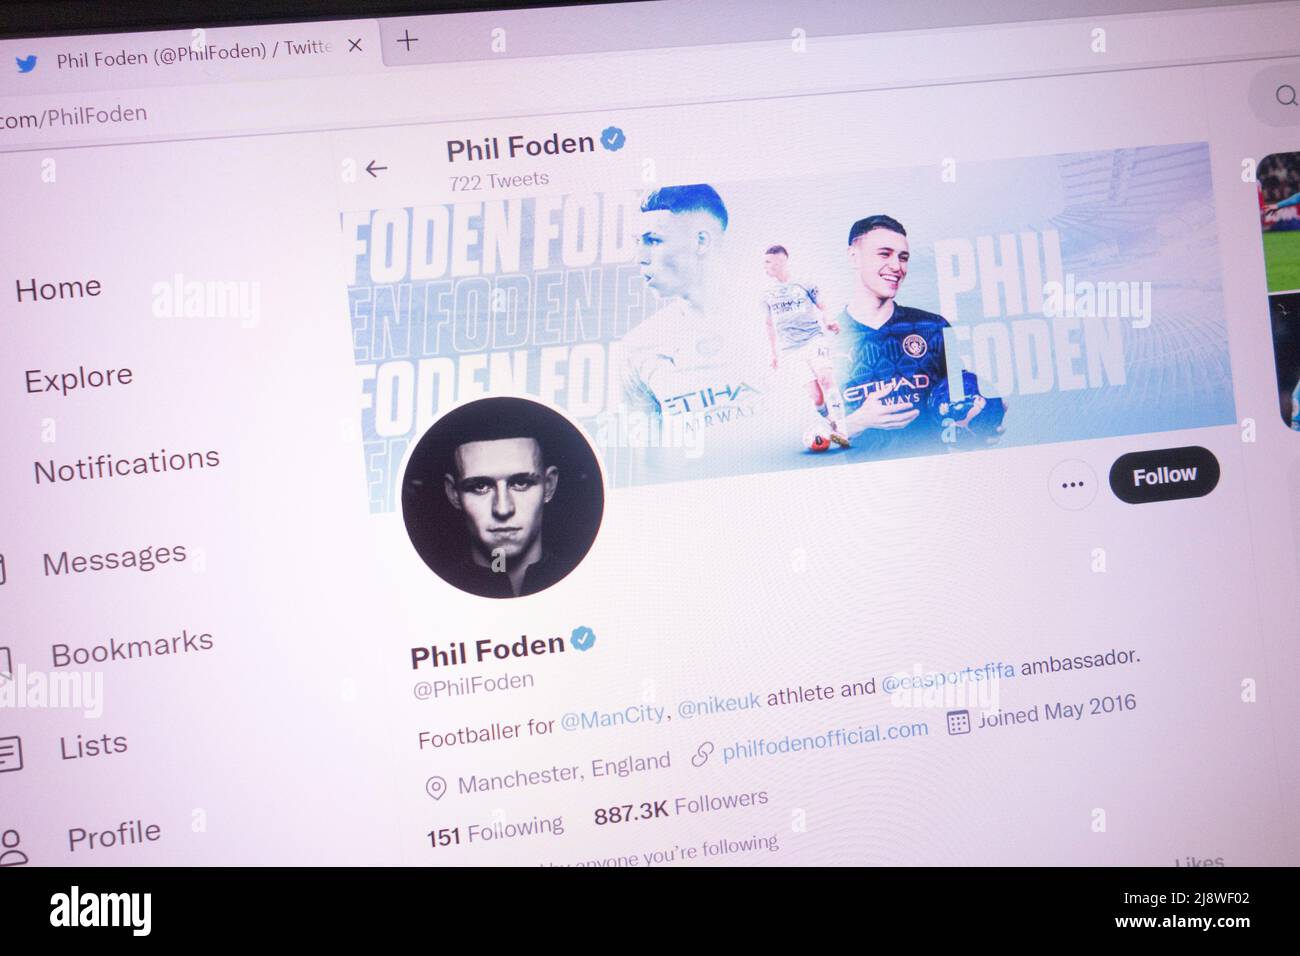 KONSKIE, POLAND - May 18, 2022: Phil Foden official Twitter account displayed on laptop screen Stock Photo